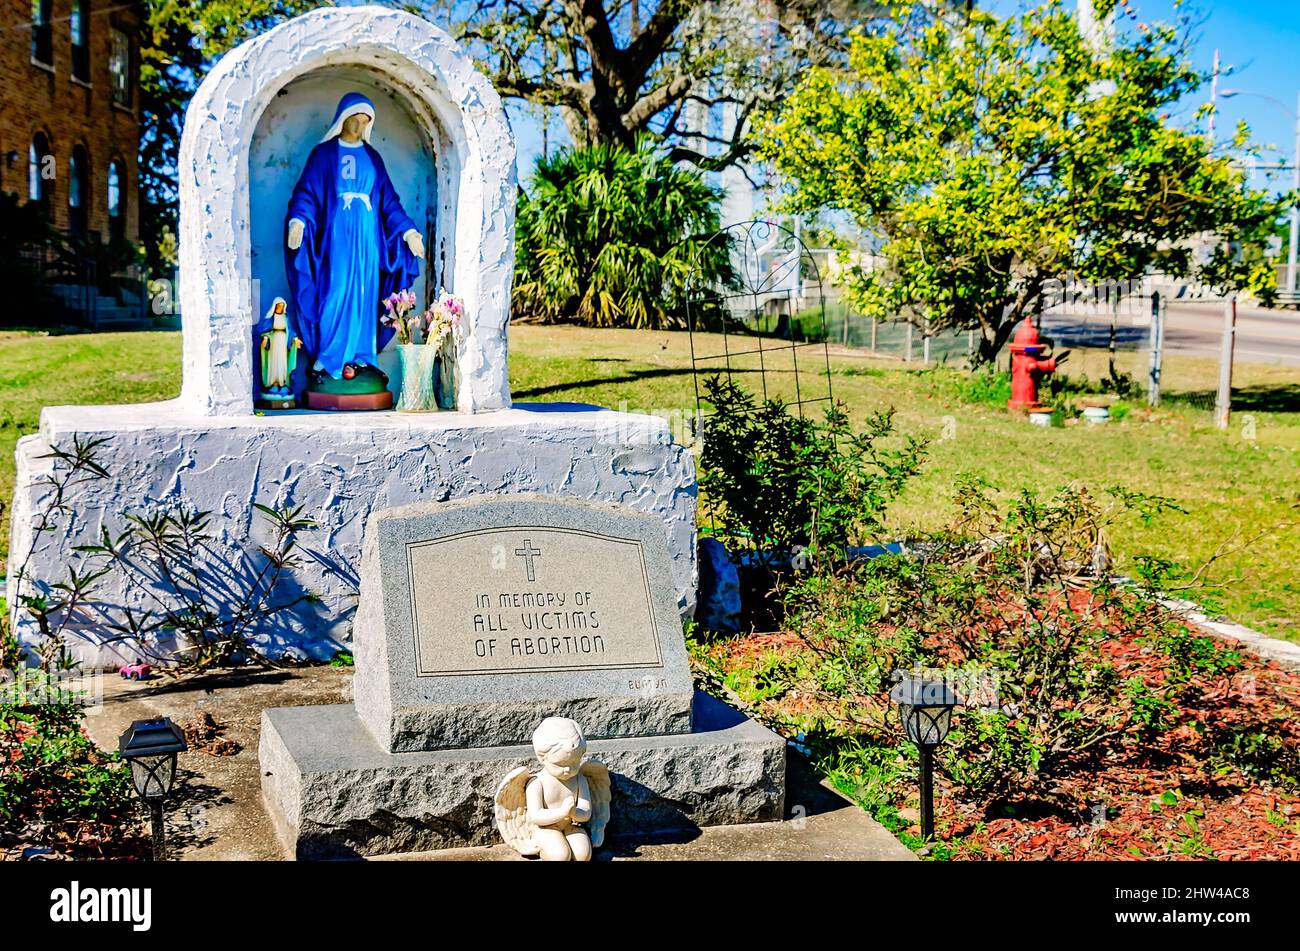 A statue of the Virgin Mary stands alongside a monument to the victims of abortion at St. Margaret Catholic Church in Bayou La Batre, Alabama. Stock Photo